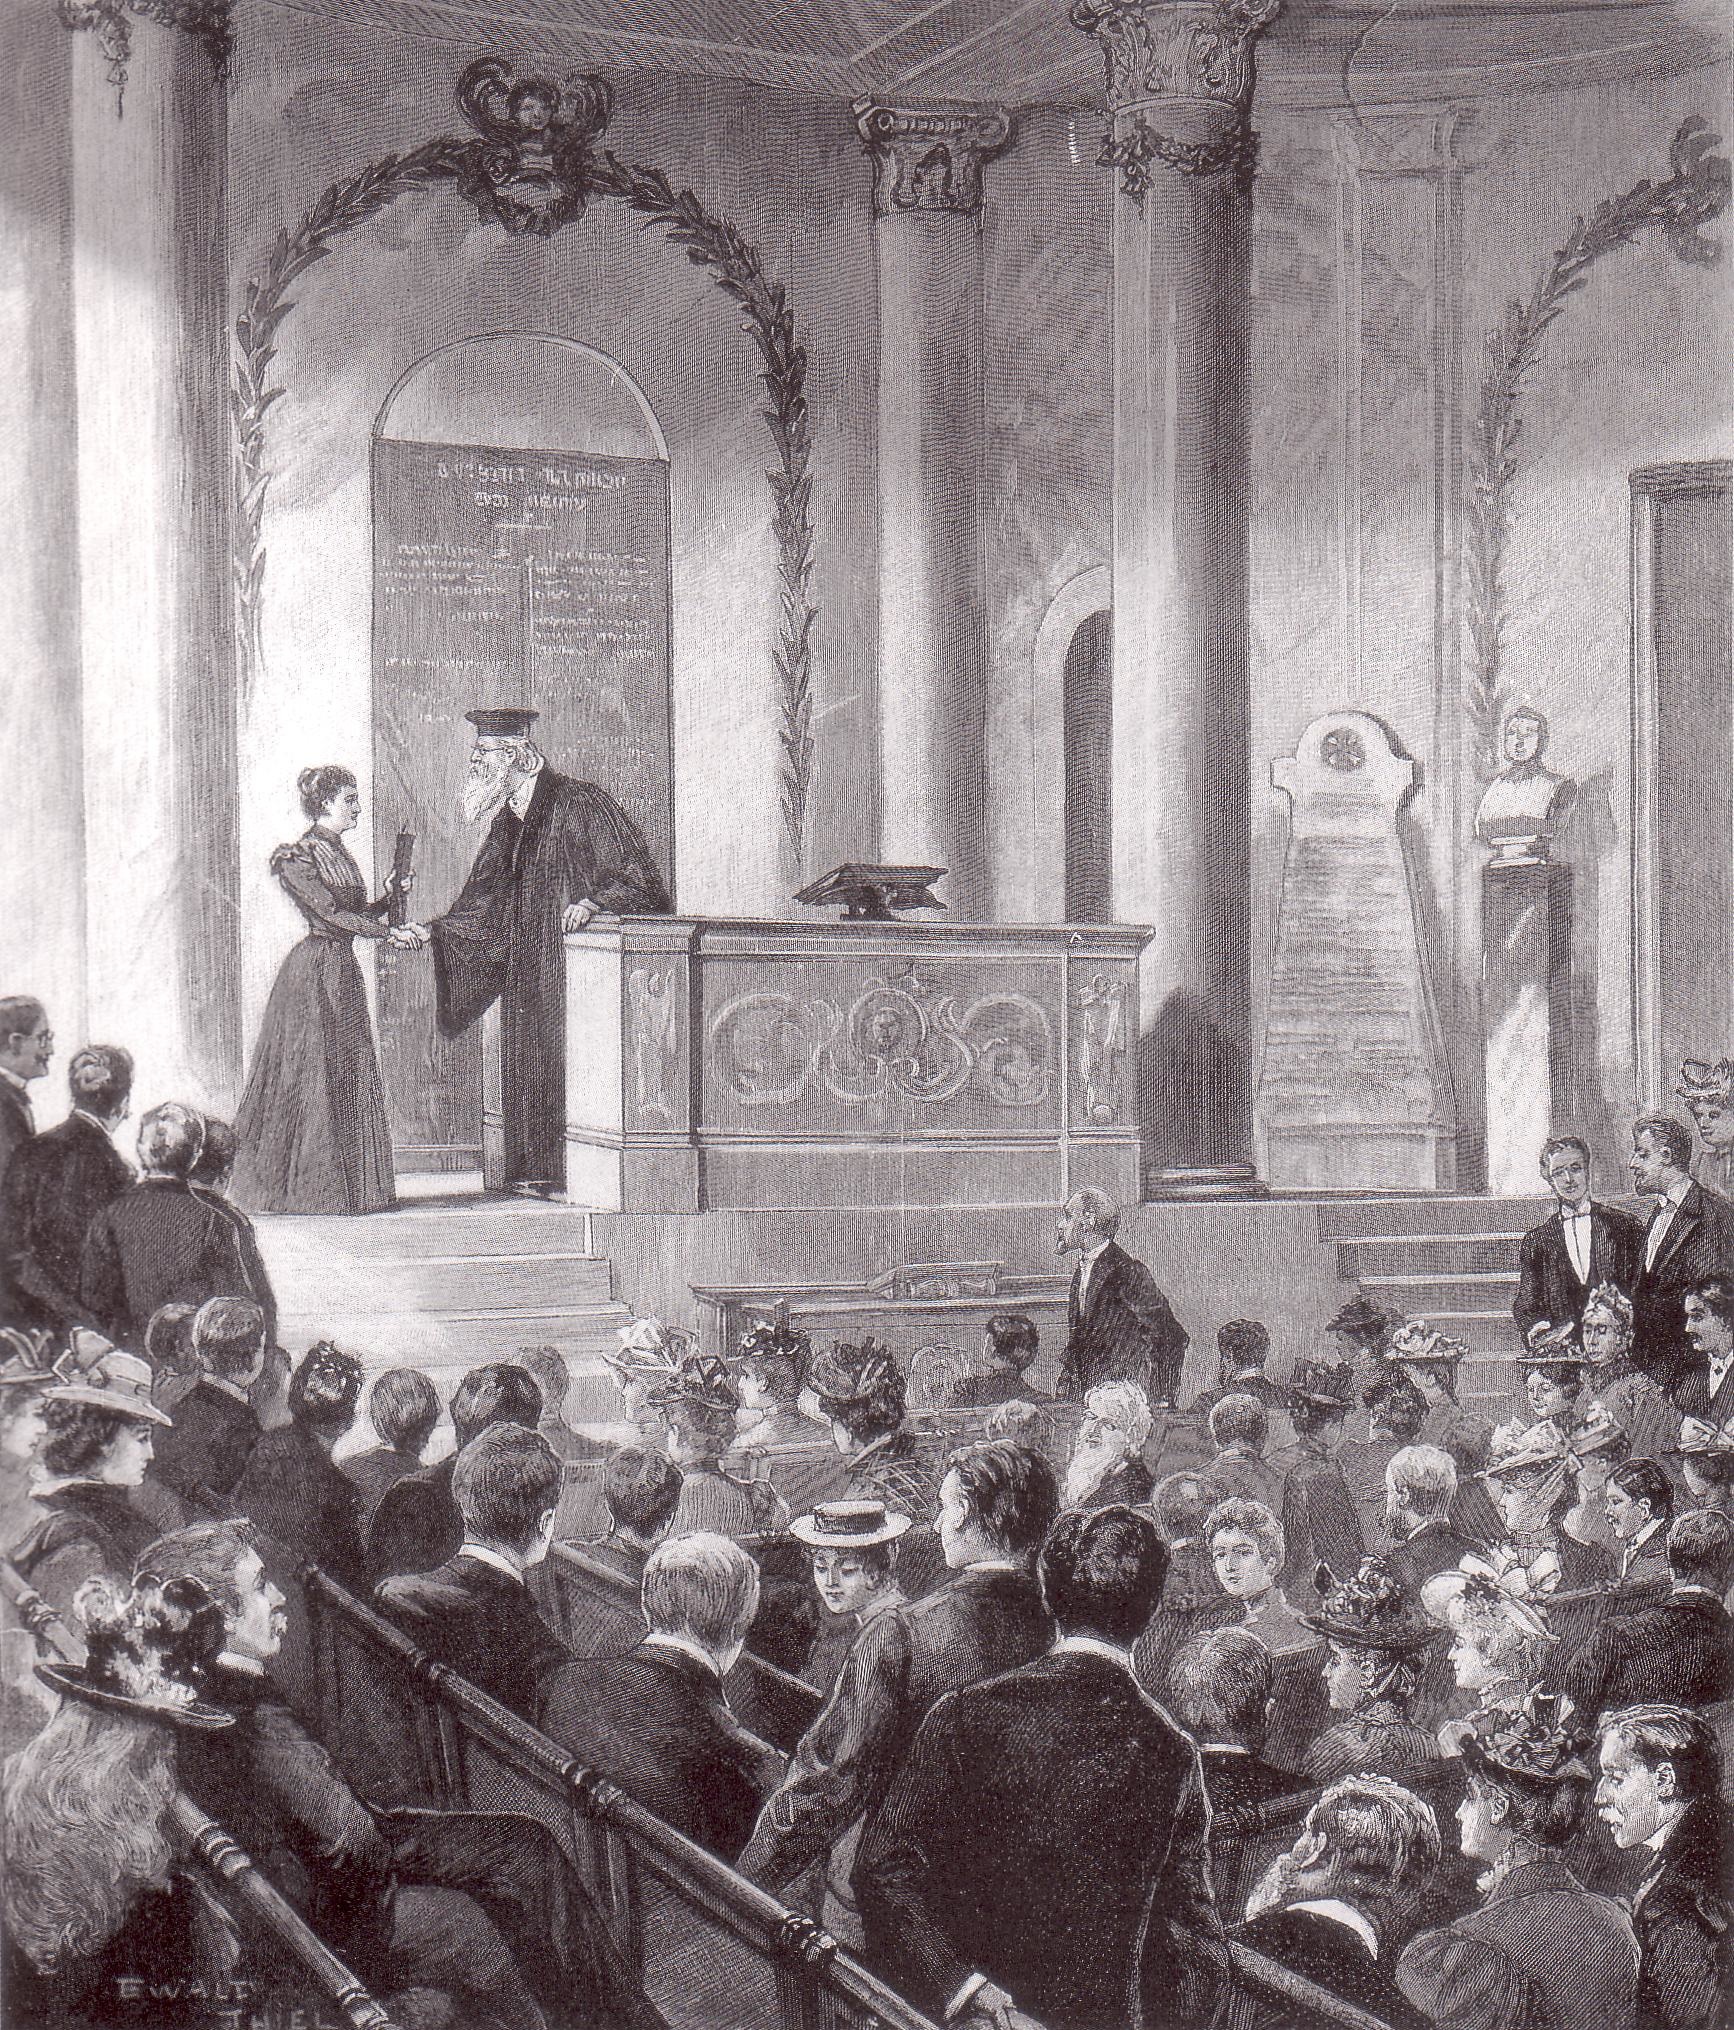 "From the Shtetl to the Lecture Hall: Jewish Women in 19th Century Europe"